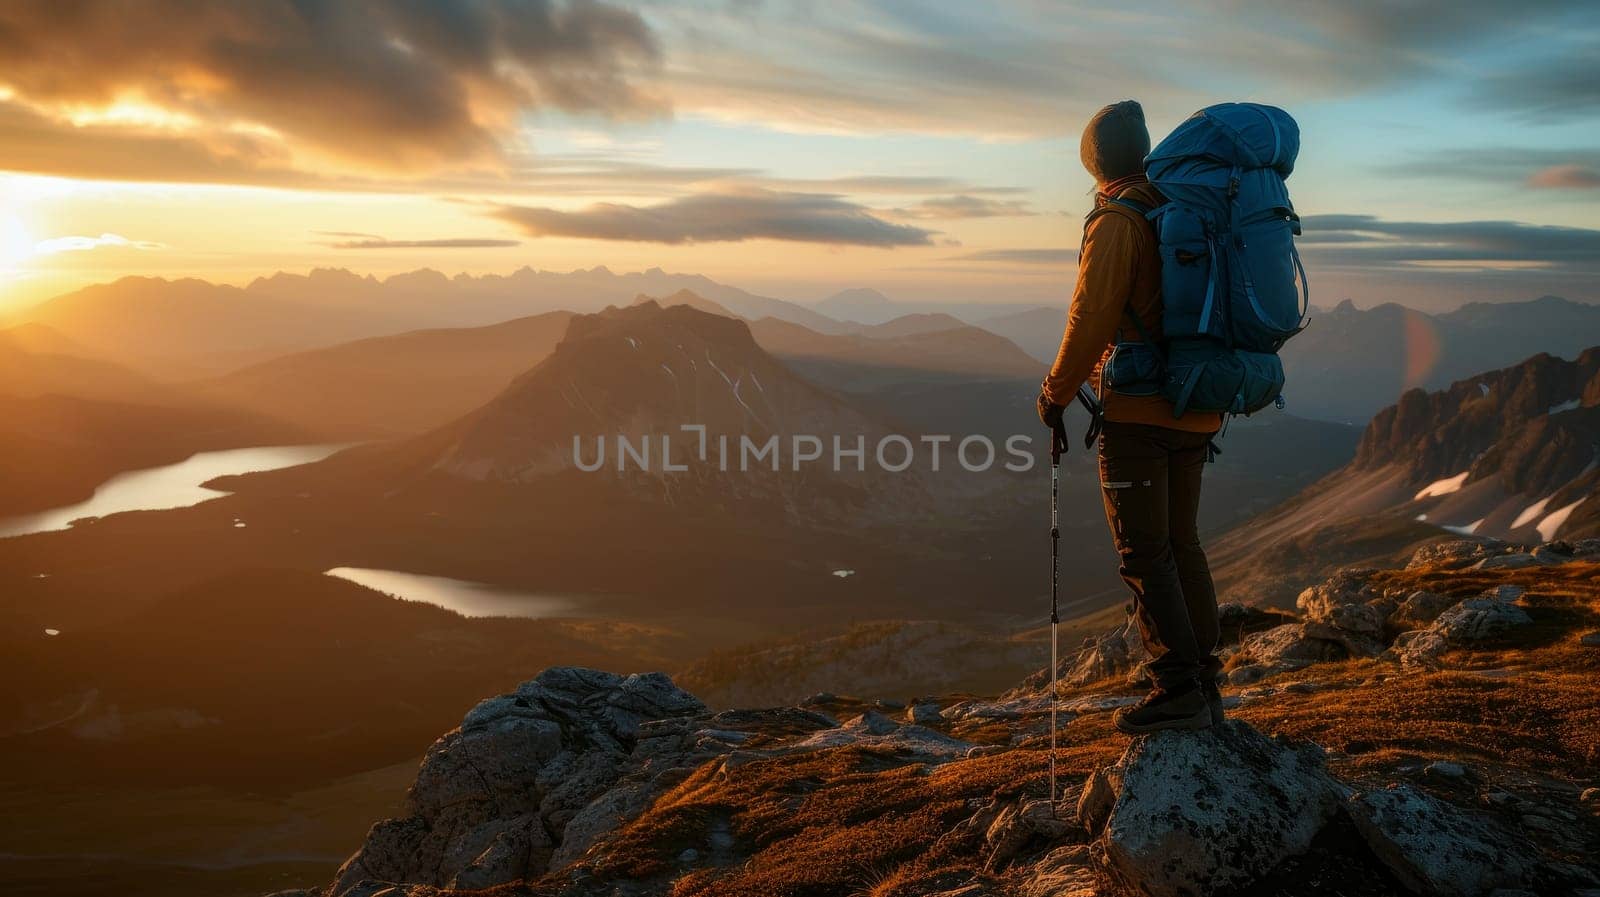 Hiker with a large backpack standing on a rocky peak, enjoying the breathtaking mountainous landscape at dusk